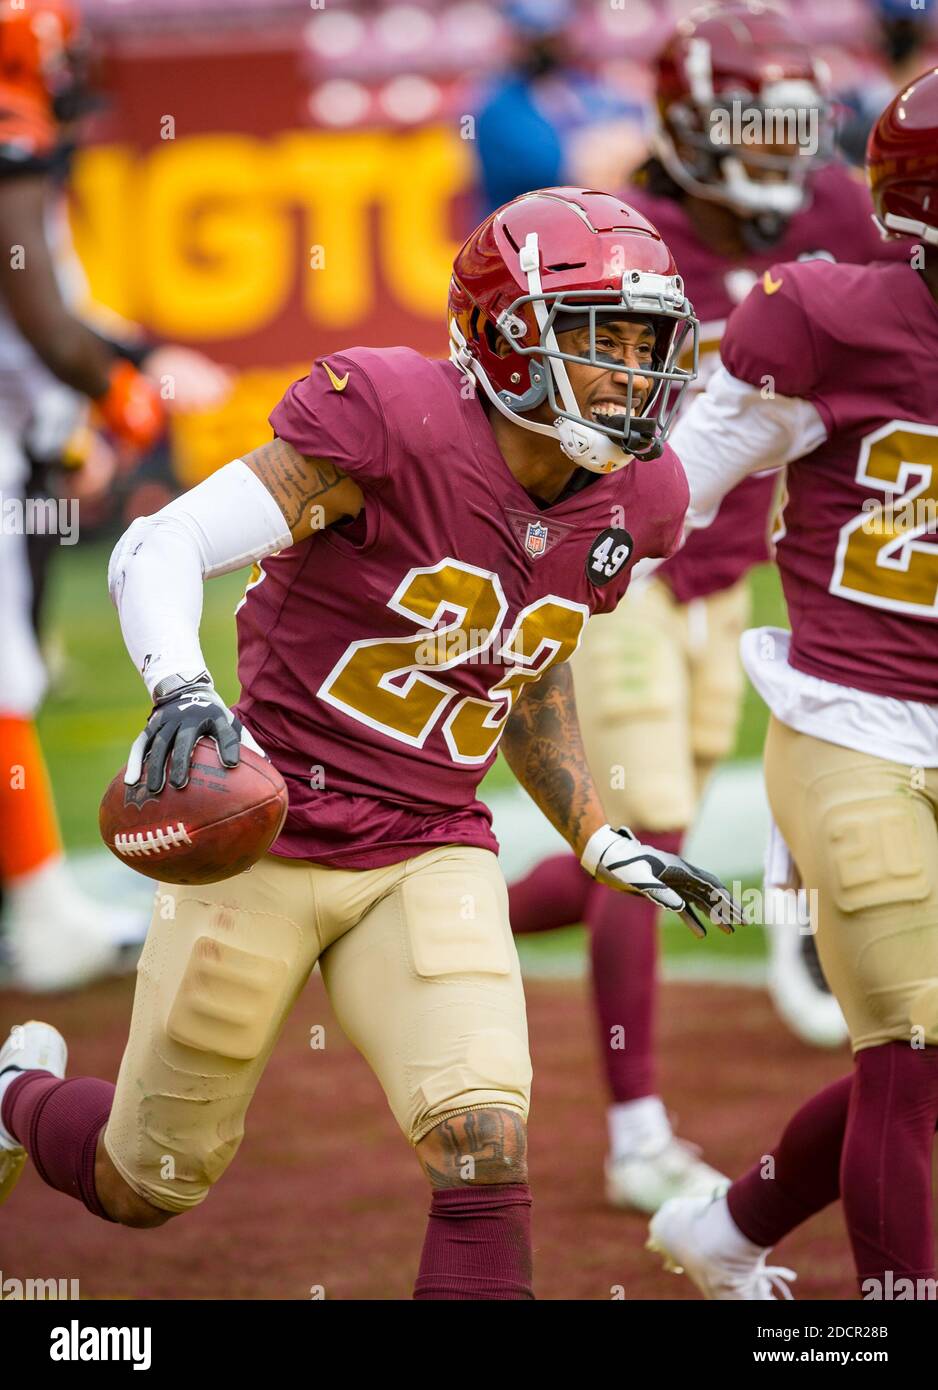 November 22, 2020: Washington Football Team cornerback Ronald Darby (23) recovers the fumble in the endzone for for a touchback during the NFL Game between the Cincinnati Bengals and Washington Football Team at FedEx Field in Landover, Maryland Photographer: Cory Royster Stock Photo